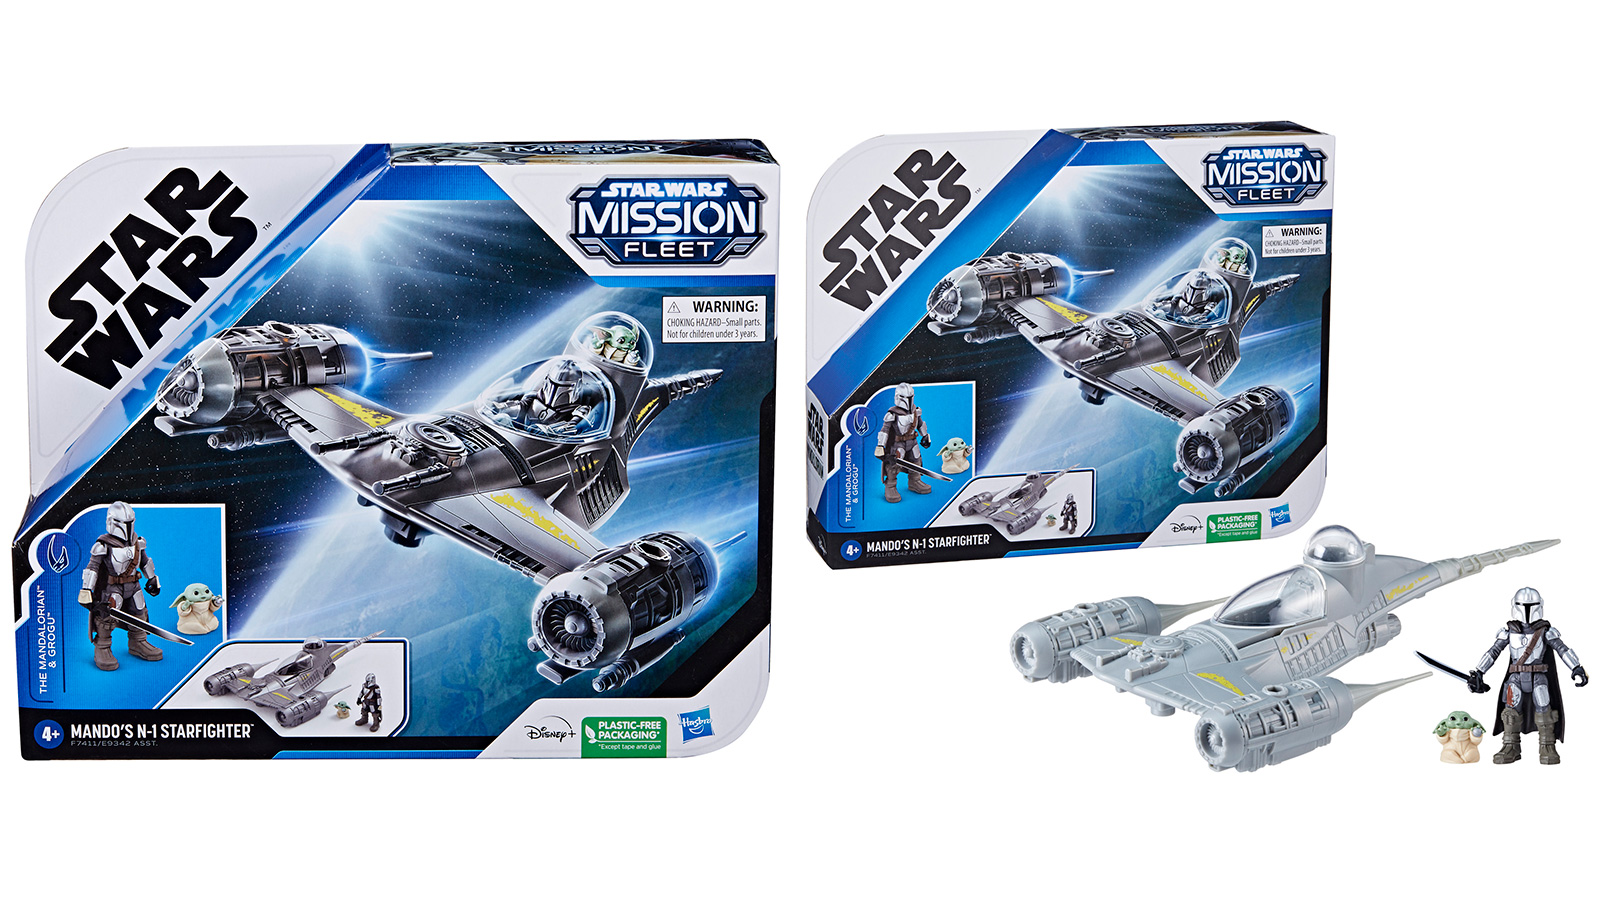 We received a Press Release and Press Photos for the newly announced Mission Fleet Mando’s N-1 Starfighter Speed Run Set. There are no preorders and it is suppose to hit retailers Spring 2023. Press Release: • STAR WARS MISSION FLEET MANDO'S N-1 STARFIGHTER SPEED RUN (HASBRO/Age 4 years & up/Approx. Retail Price: $22.99/Available: Spring 2023) Blast off into galactic action with the Star Wars Mission Fleet Mando's N-1 Starfighter Grogu & Mandalorian action figure set. This Star Wars toy includes a 2.5-inch-scale Mandalorian figure with fully poseable arms, legs, and head, as well as design and detail inspired by The Mandalorian live-action series on Disney+. This Mission Fleet Star Wars playset also comes with a Darksaber accessory and Grogu figure, affectionately referred to as "Baby Yoda" by fans. This Star Wars set comes with The Mandalorian's N-1 Starfighter ship, featuring series-inspired design, an opening cockpit for the Mandalorian toy, and a hatch where Grogu can sit. Place the Mandalorian action figure in the cockpit of the N-1 Starfighter and the Grogu toy inside the hatch to imagine speeding through the galaxy.